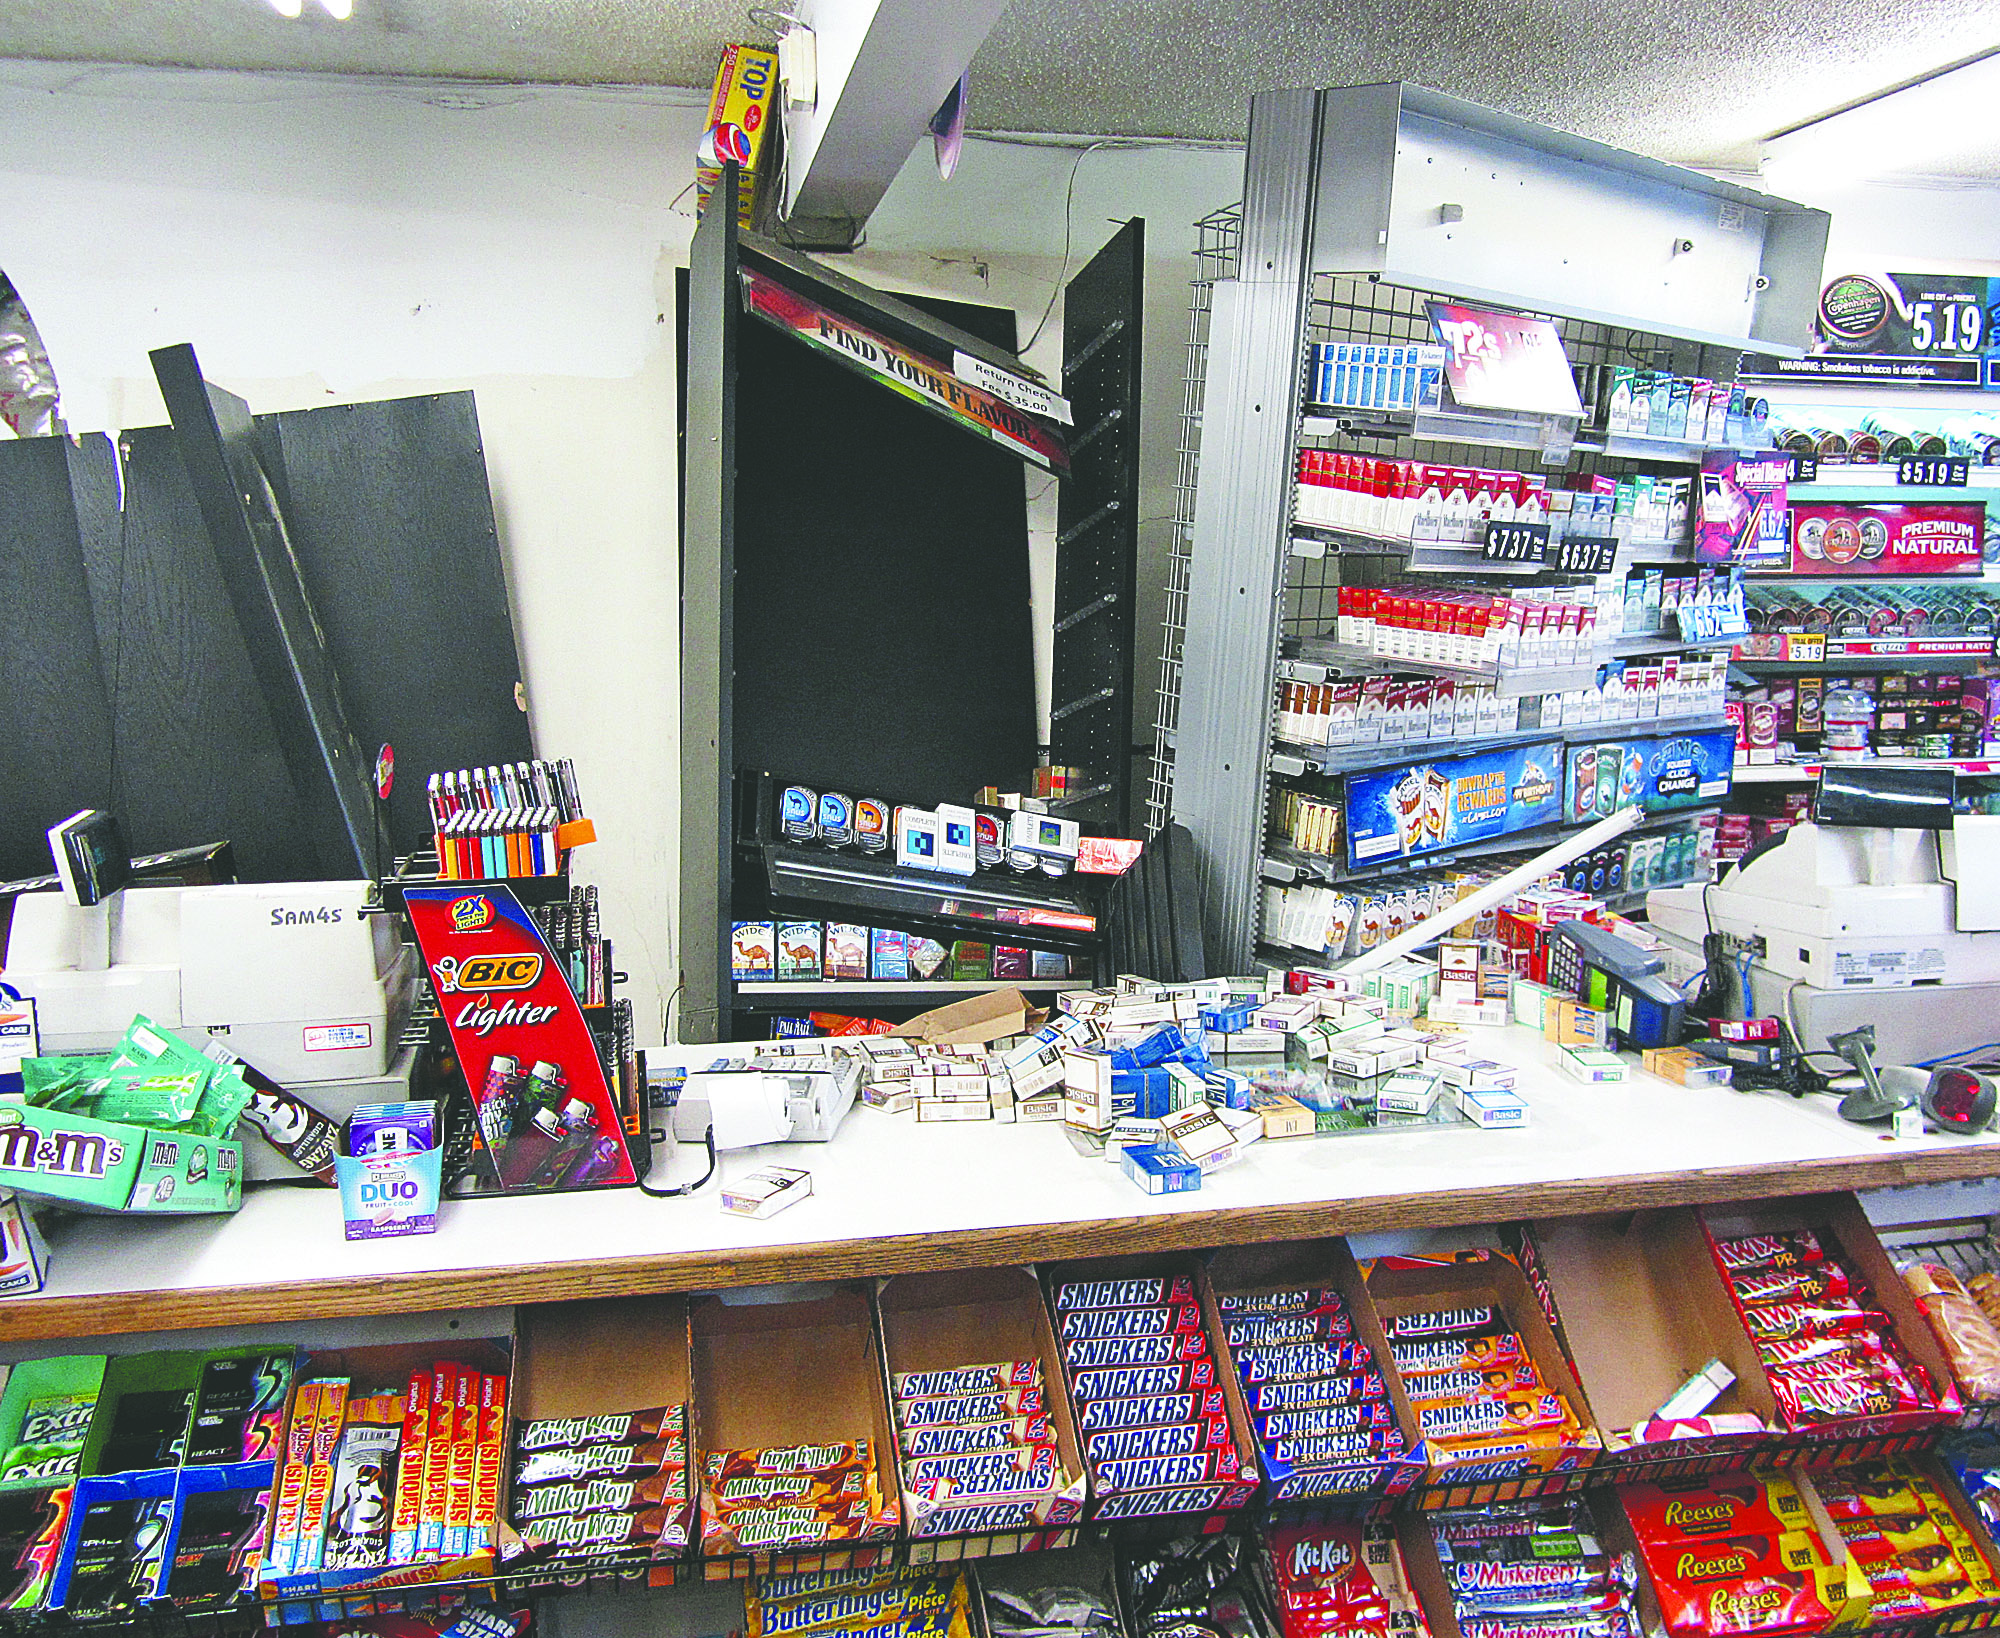 Product shelves inside the Grandview grocery are pushed askew after a car rammed the building Tuesday. Cami Cromer